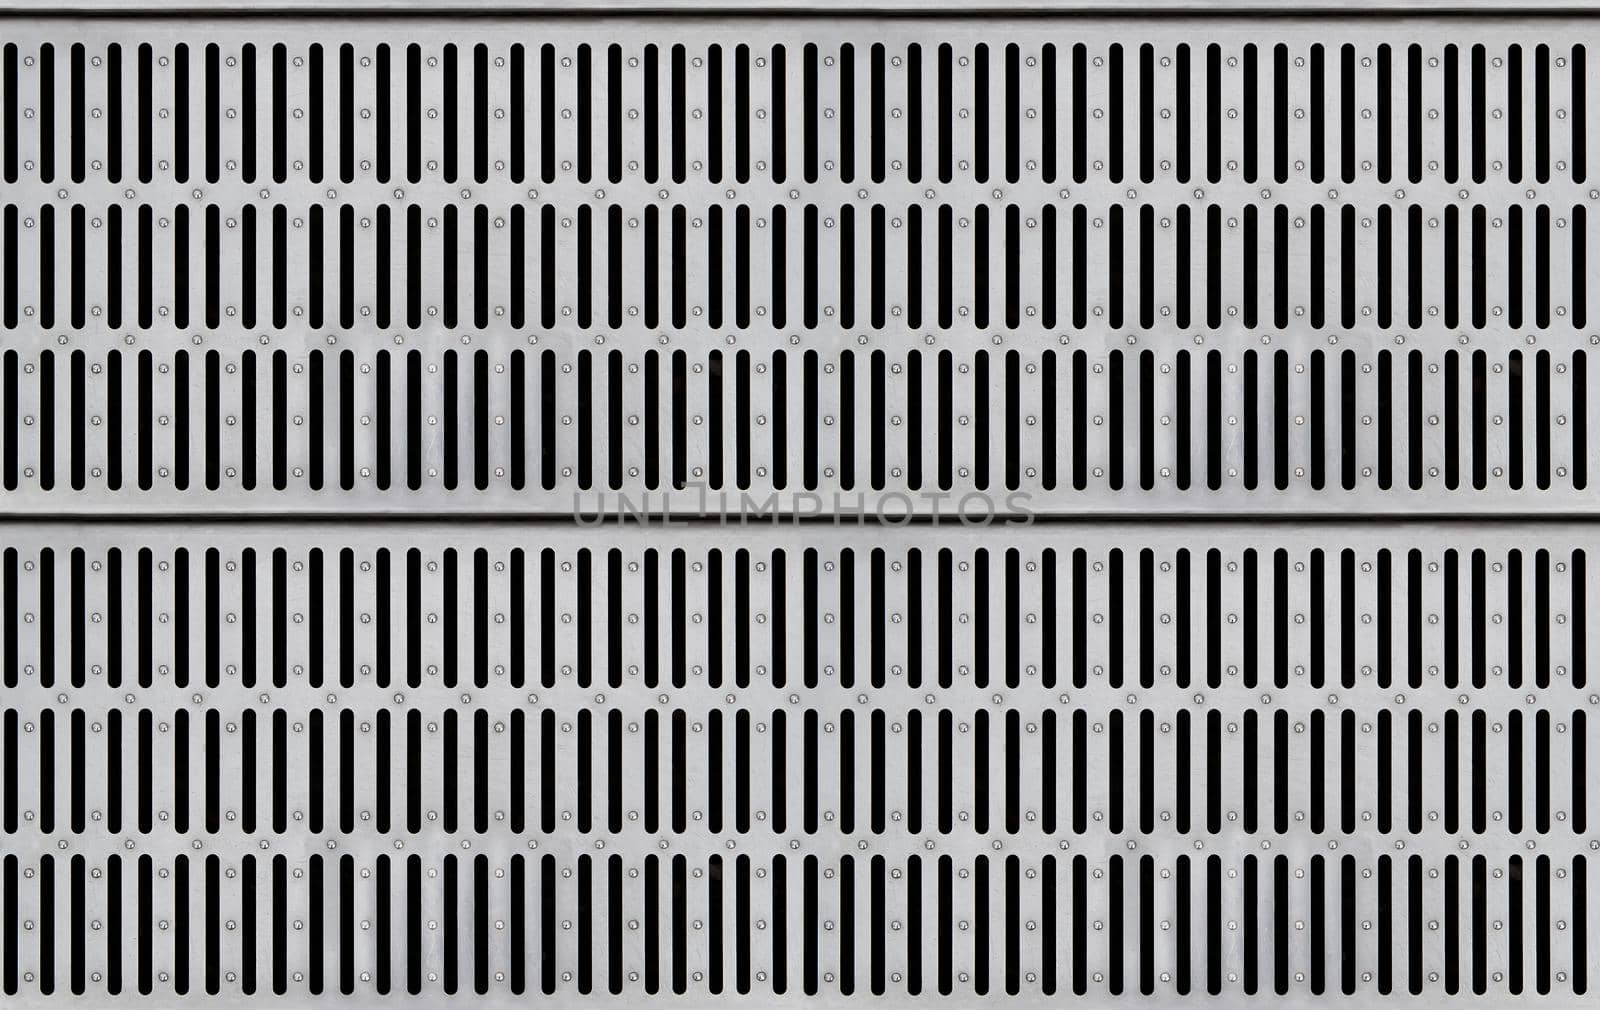 Seamless texture of silver-colored metal grate for water drain with long slits. by Laguna781